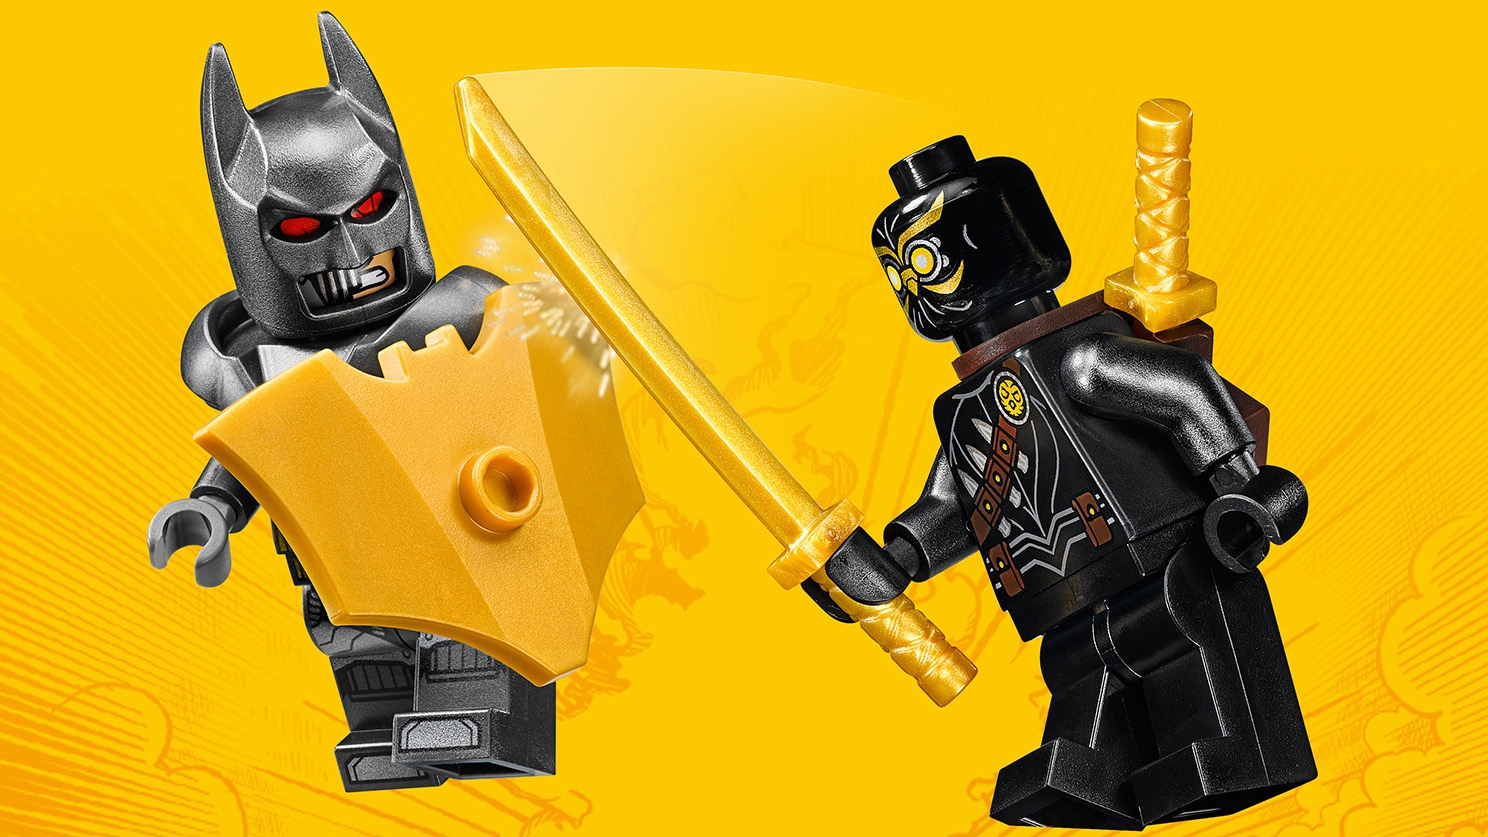 lego 76110 batman the attack of the talons